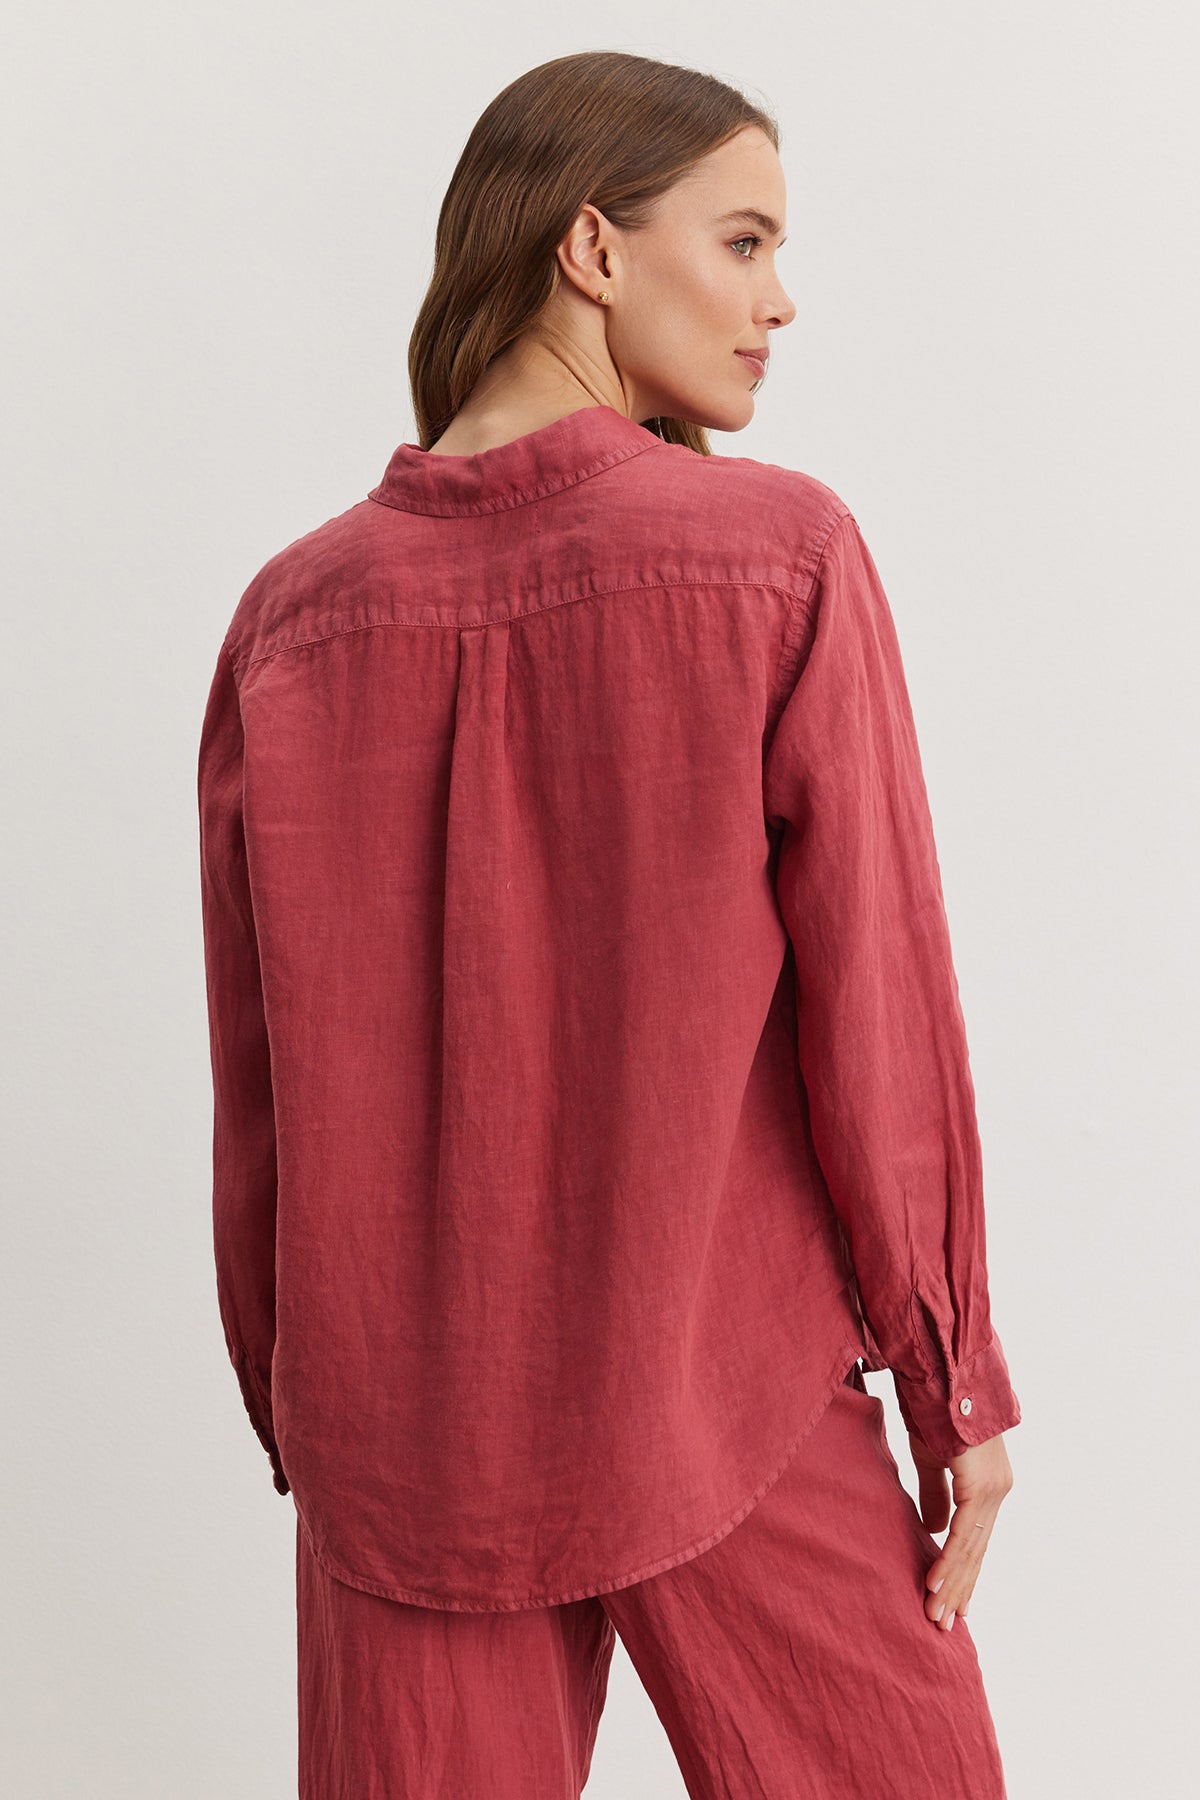 Woman wearing a red WILLOW LINEN BUTTON-UP SHIRT by Velvet by Graham & Spencer, viewed from behind, with focus on the shirt's design details like the yoke and gathered fabric.-36909598343361